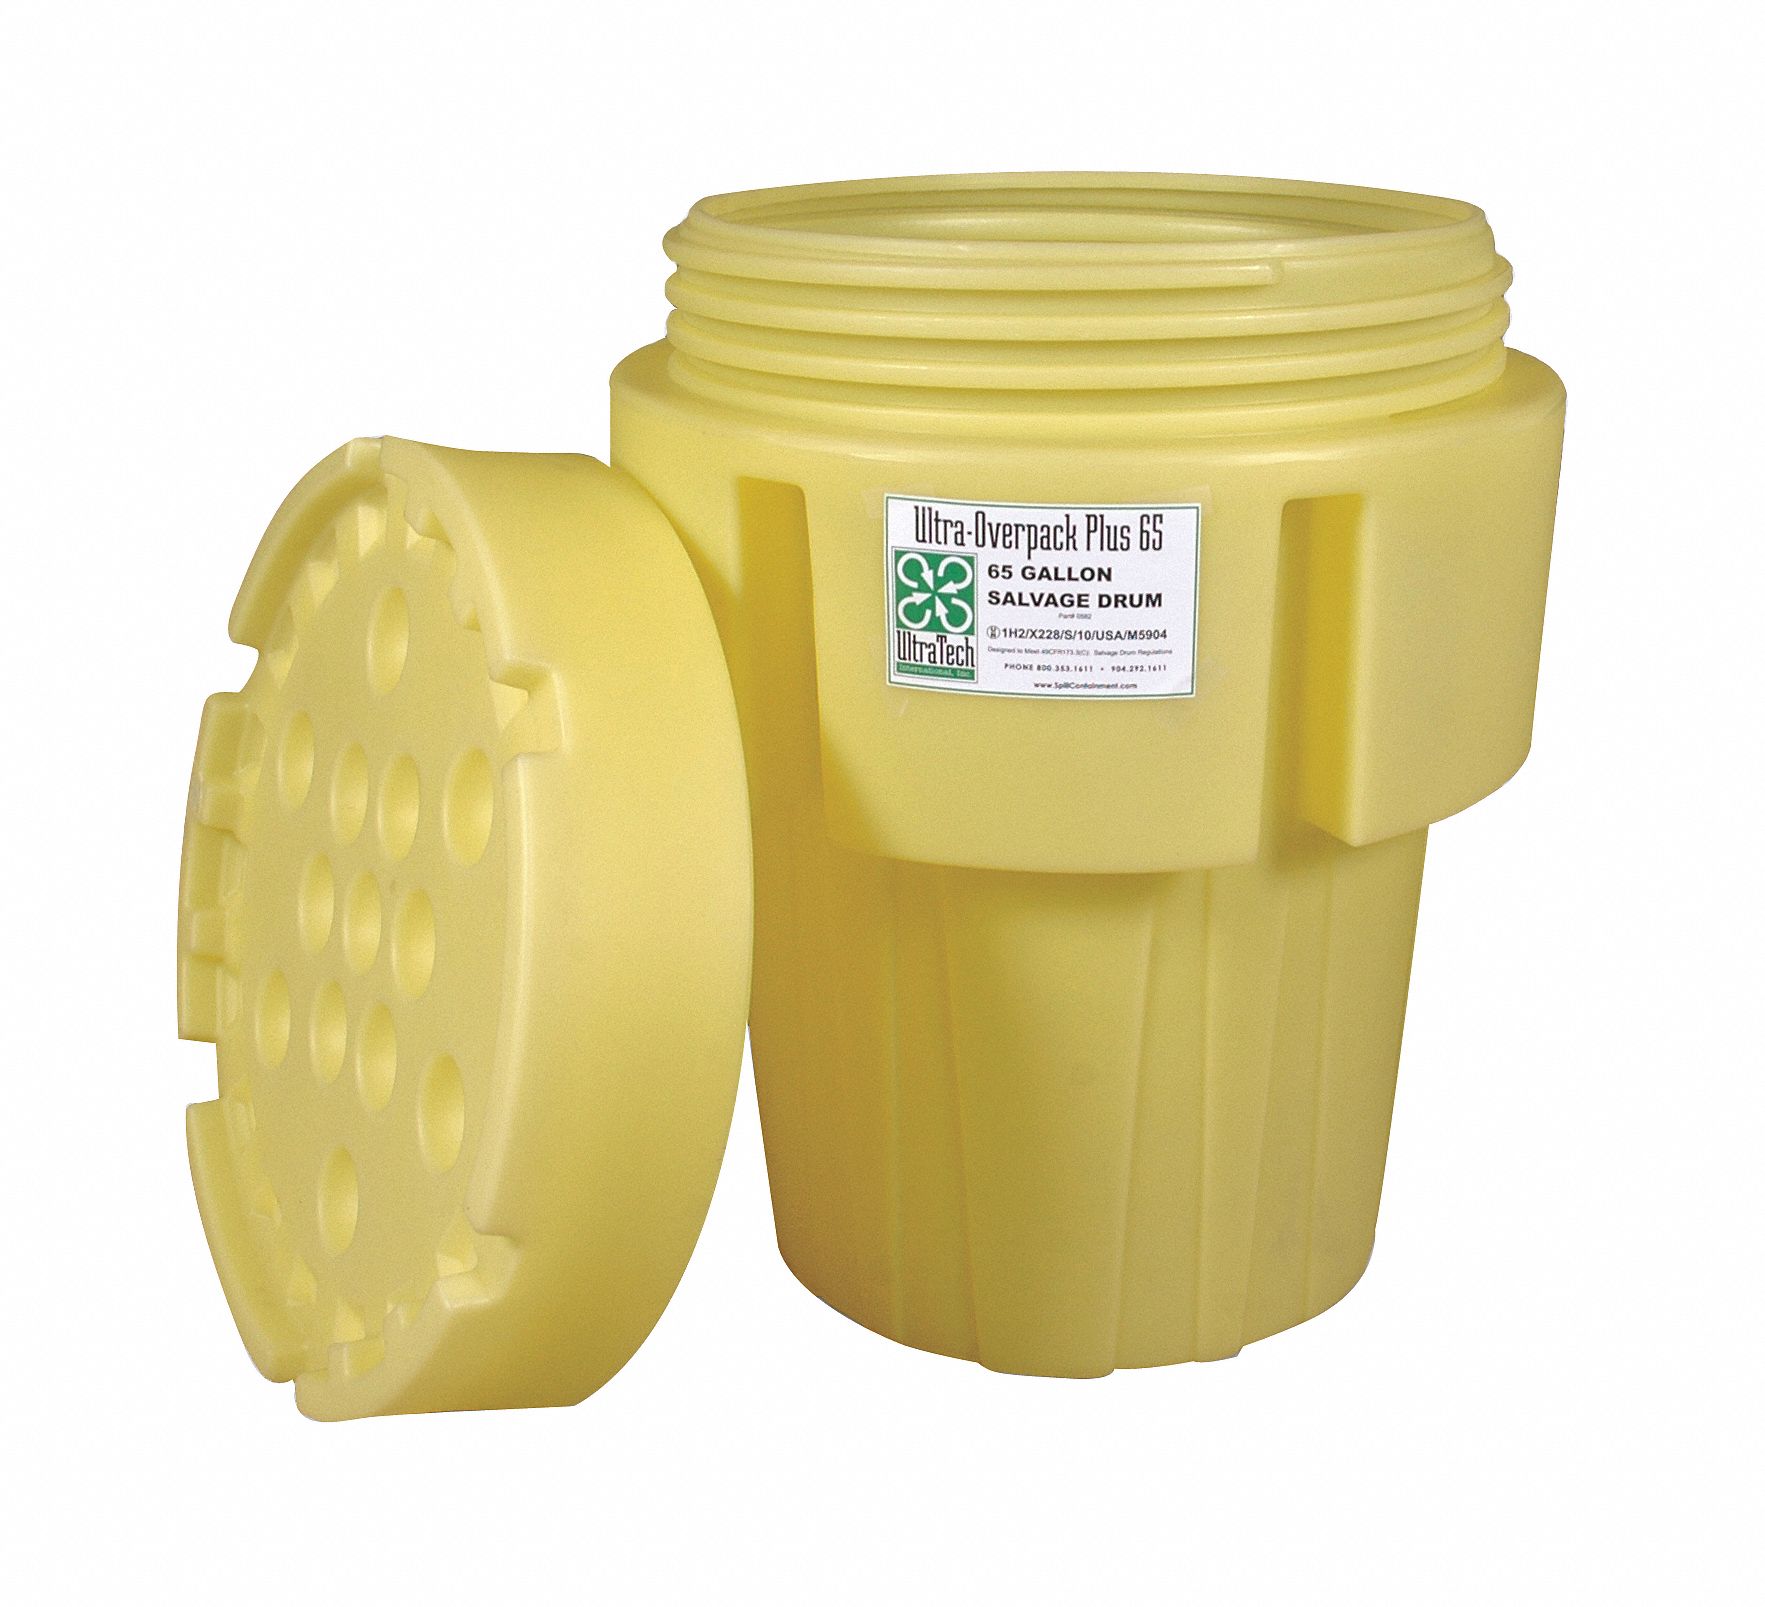 Overpack Drum: 65 gal Capacity, 1H2/X228/S/USA/M5904 UN Rating Solid, 36 1/4 in Overall Ht, Yellow